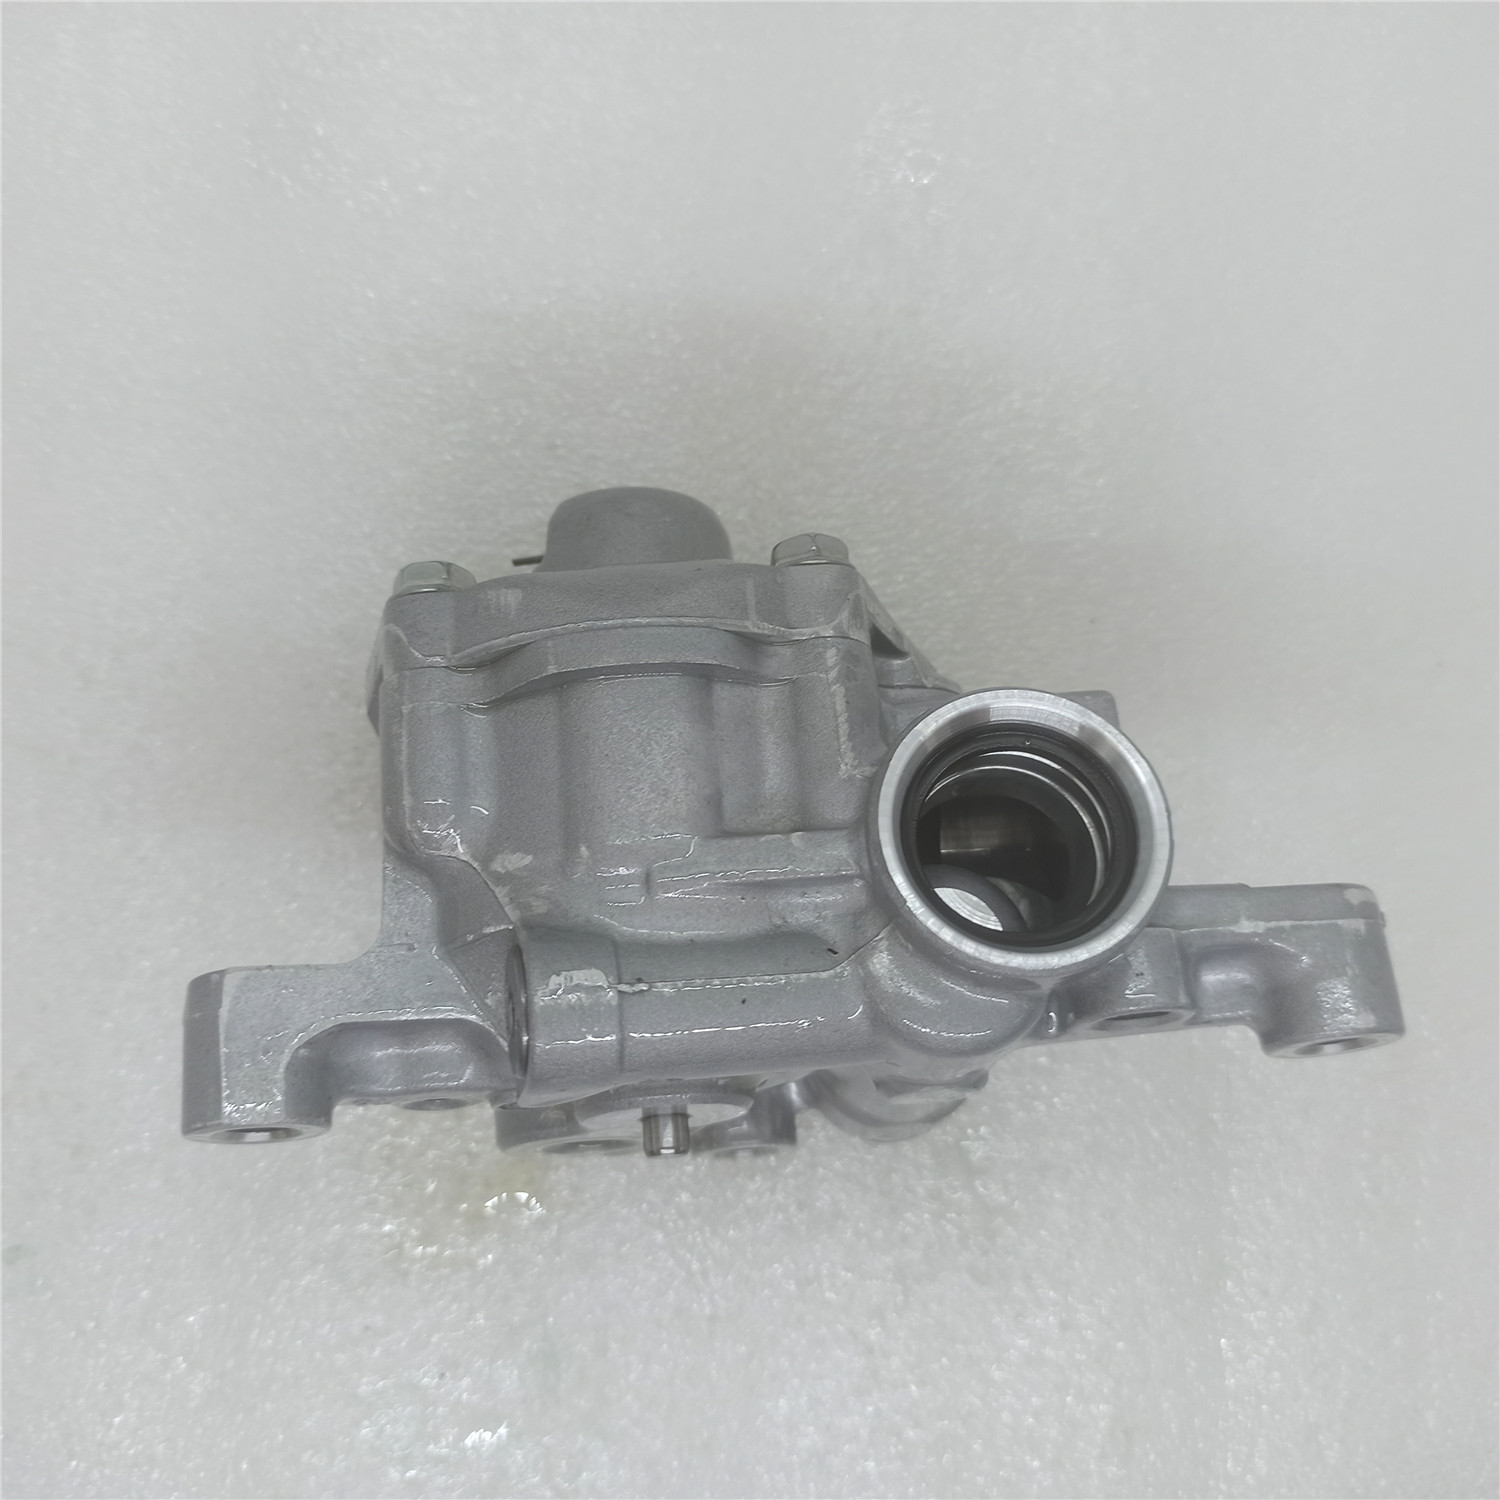 JF015E-0003-FN JATCO RE0F11A JF015E CVT OIL PUMP FROM NEW TRANS For Ni ssan Sunny 1.5L Tiida Sylphy 1.6L Sale